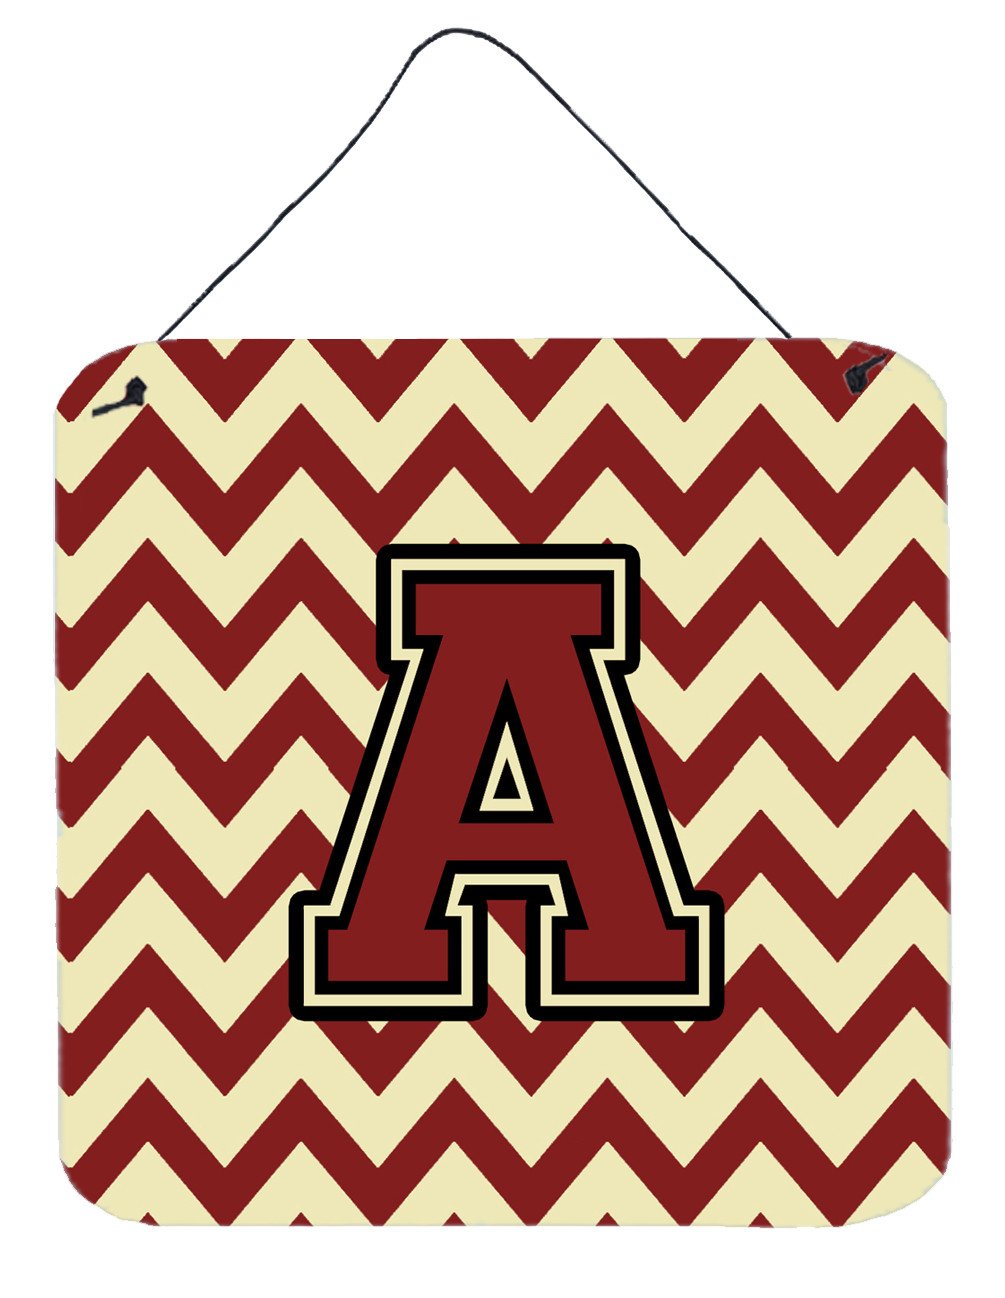 Letter A Chevron Maroon and Gold Wall or Door Hanging Prints CJ1061-ADS66 by Caroline's Treasures